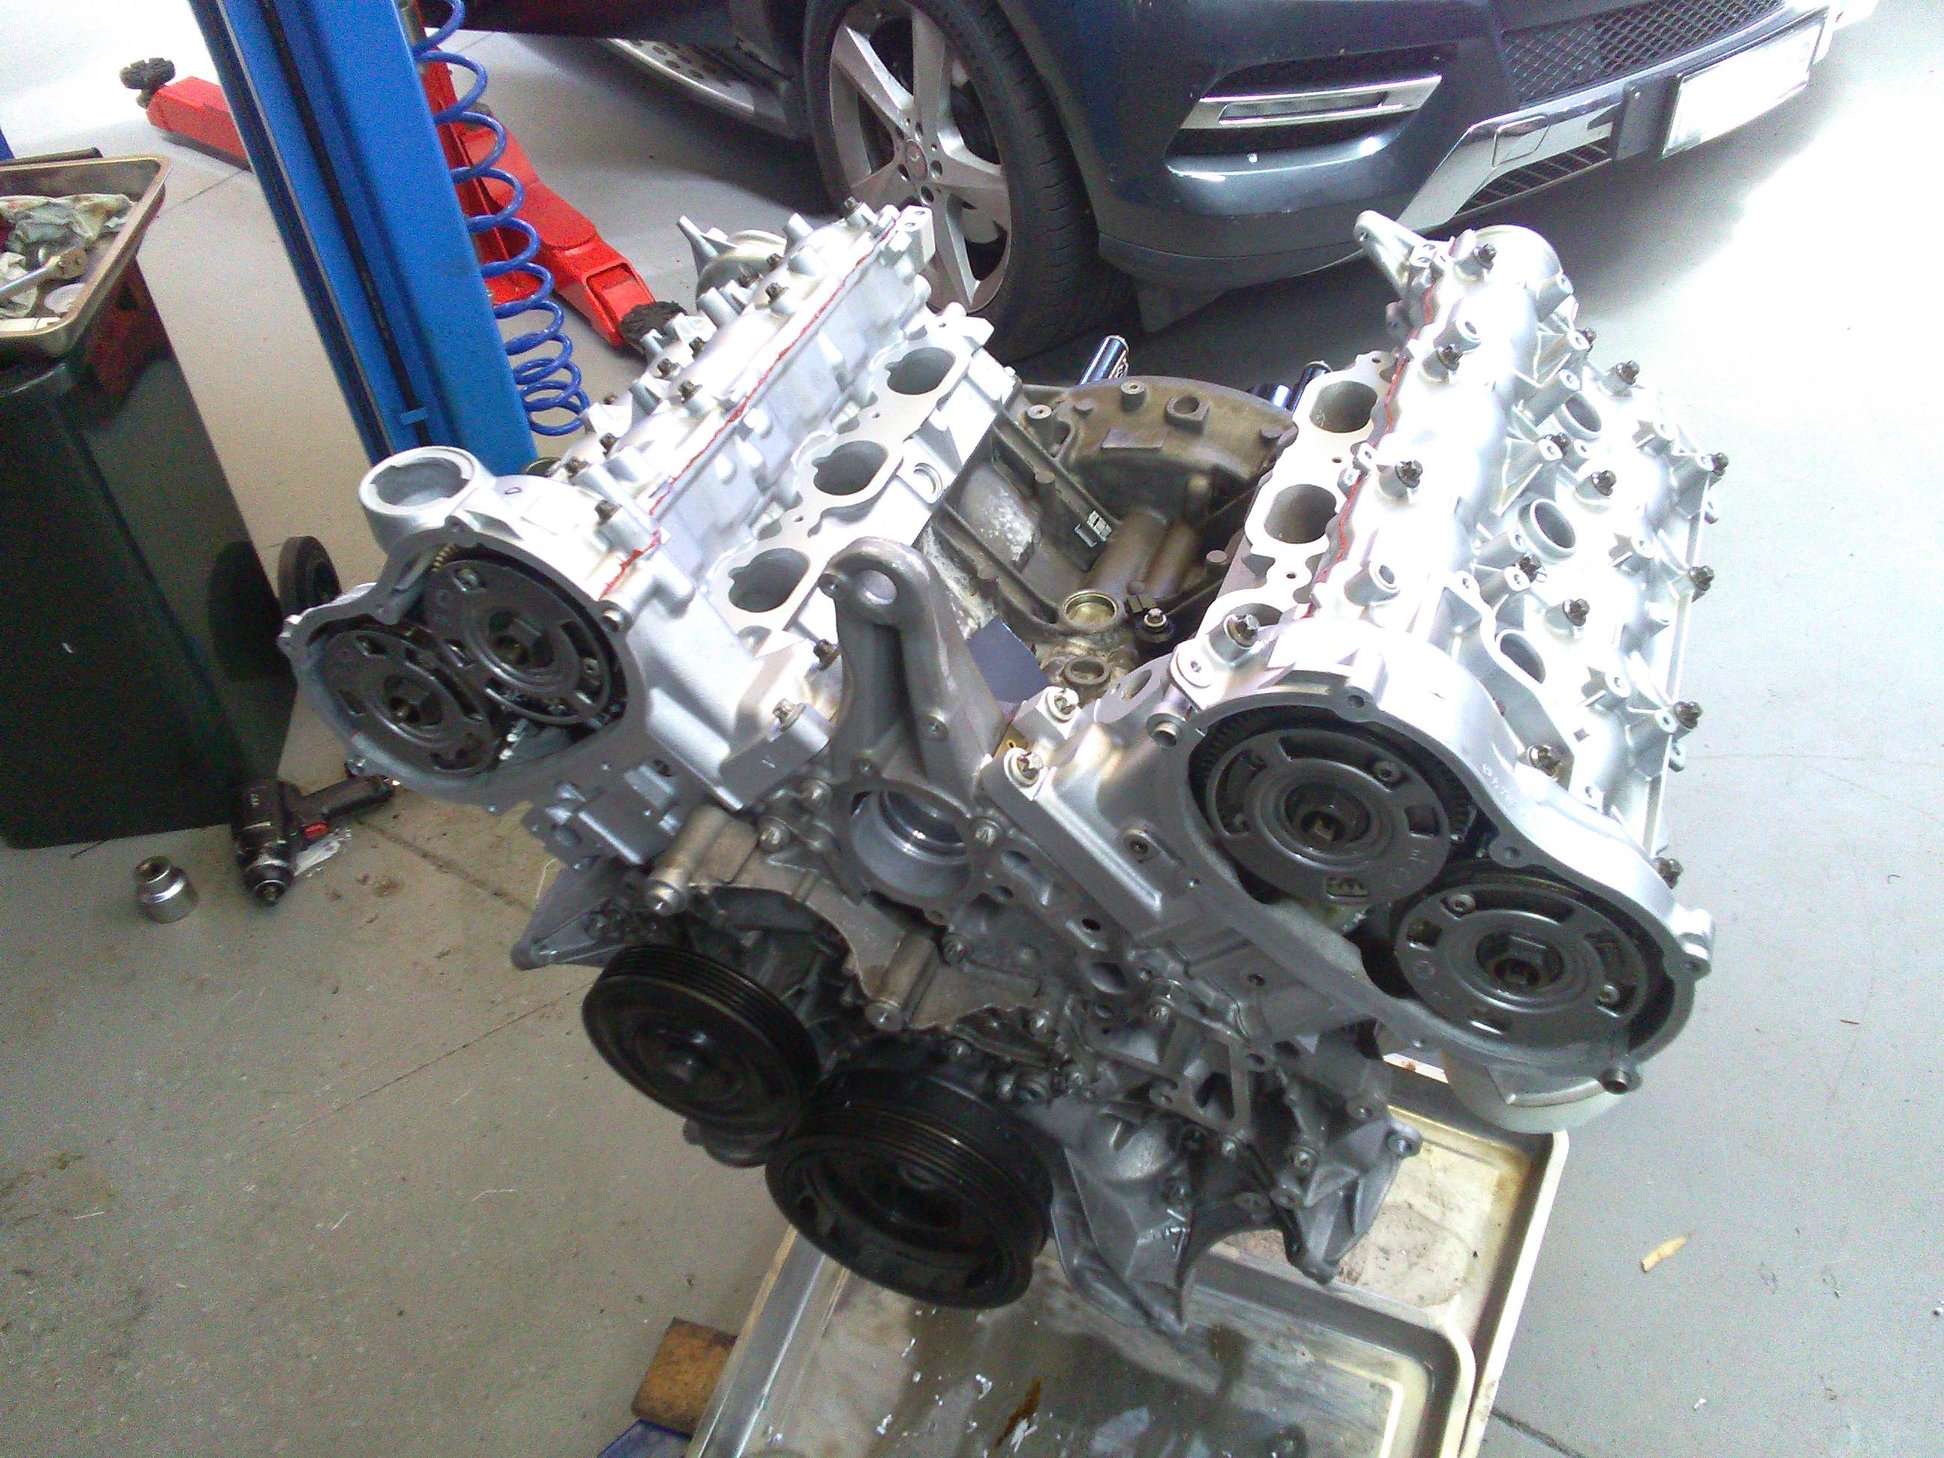 stripped engine on an engine stand